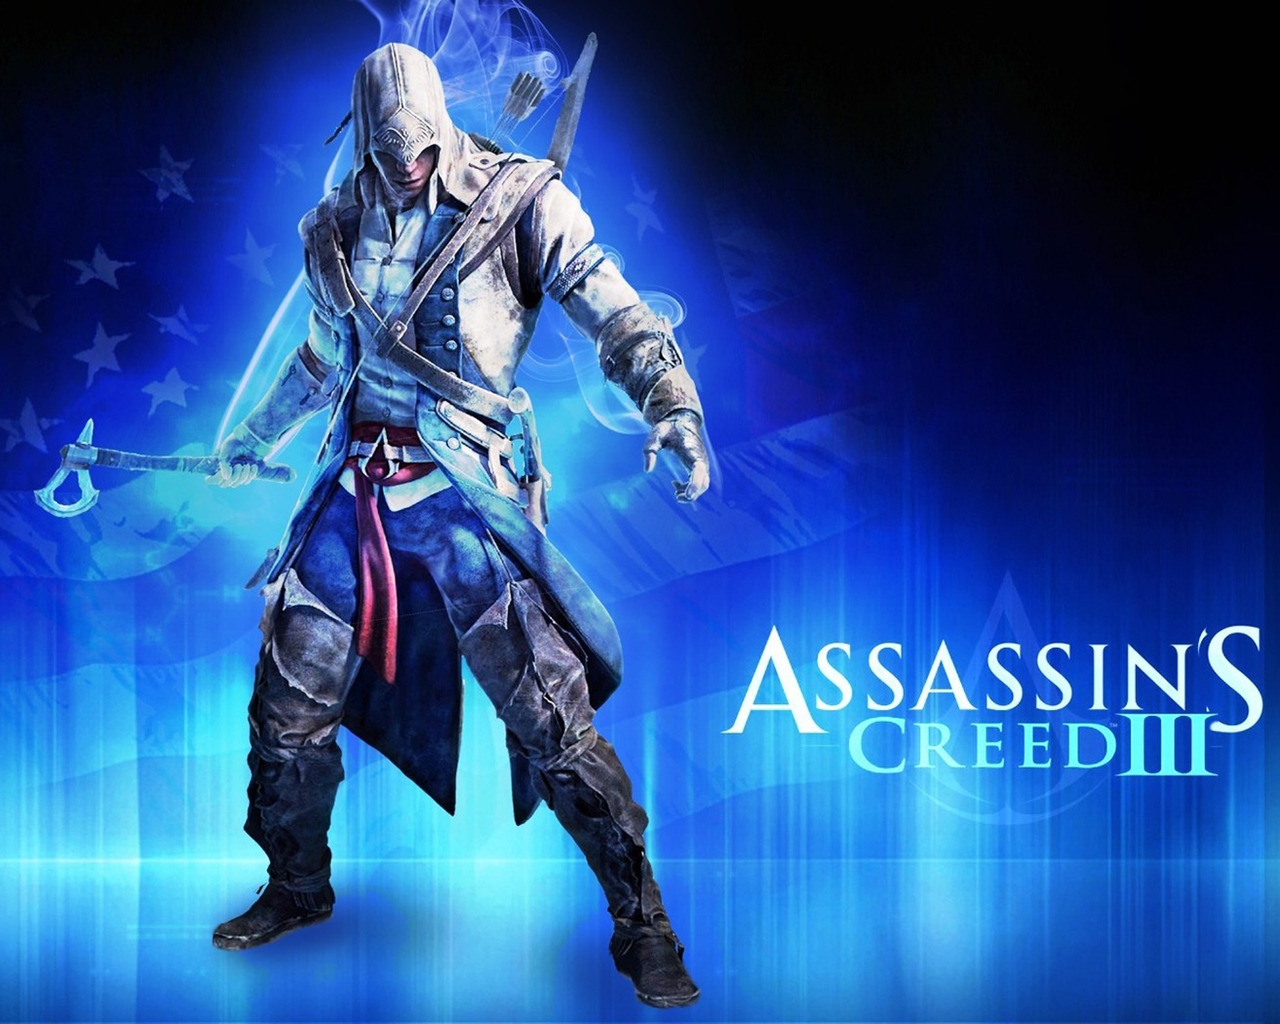 Assassin Creed III for 1280 x 1024 resolution